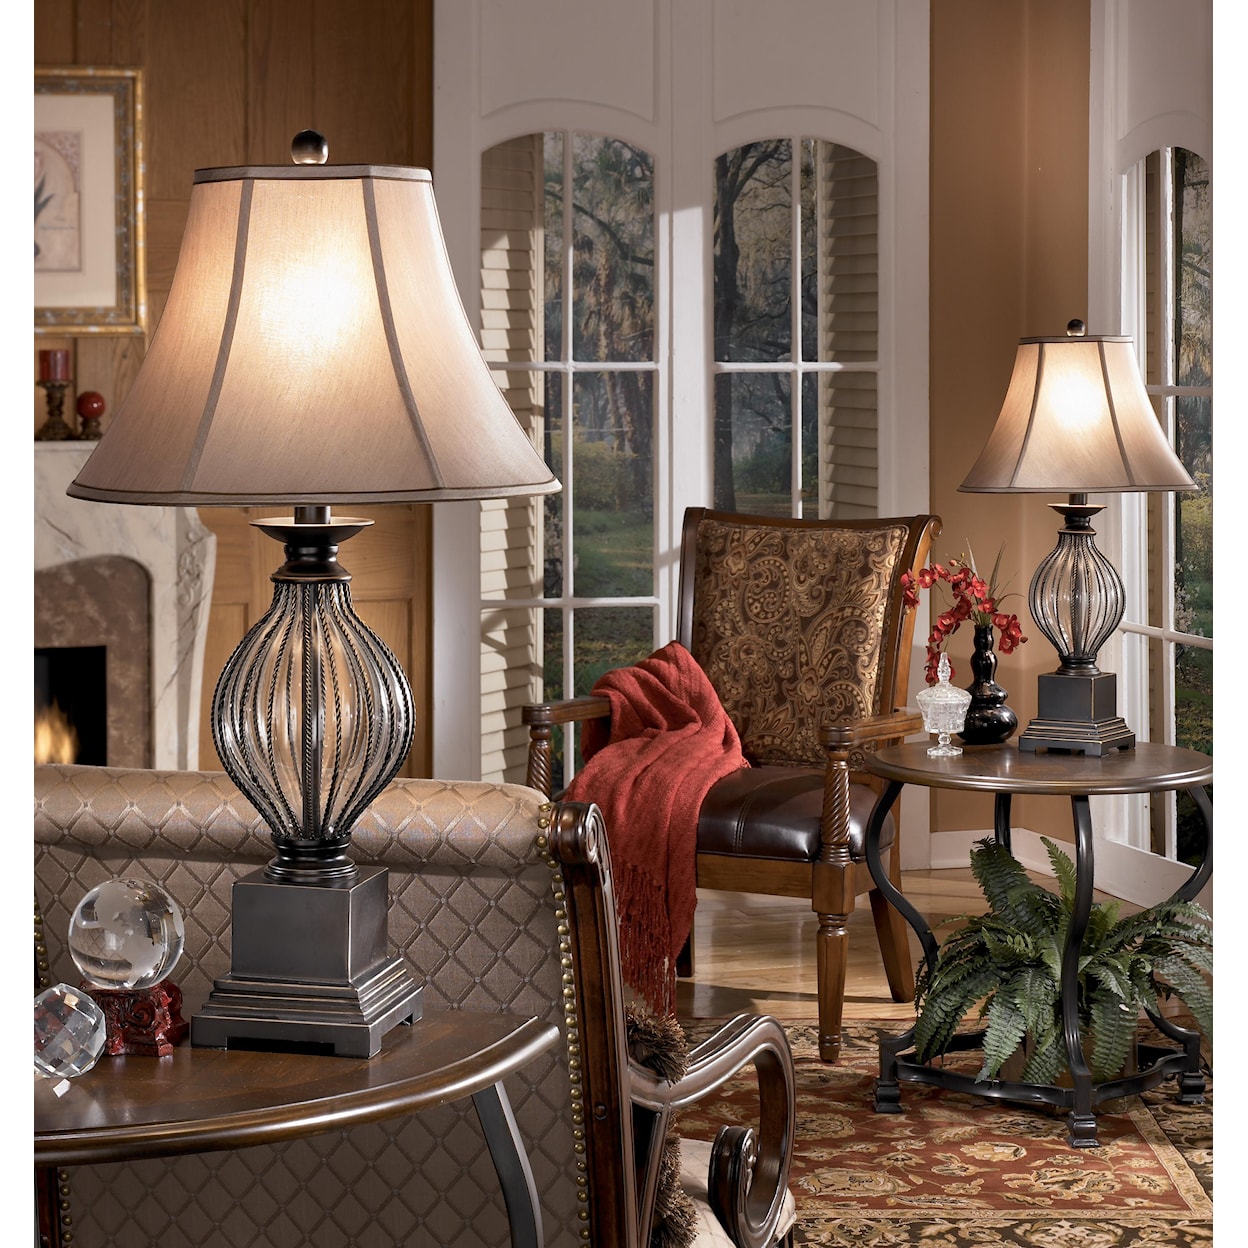 Signature Design by Ashley Lamps - Traditional Classics Set of 2 Ondreya Metal Table Lamps